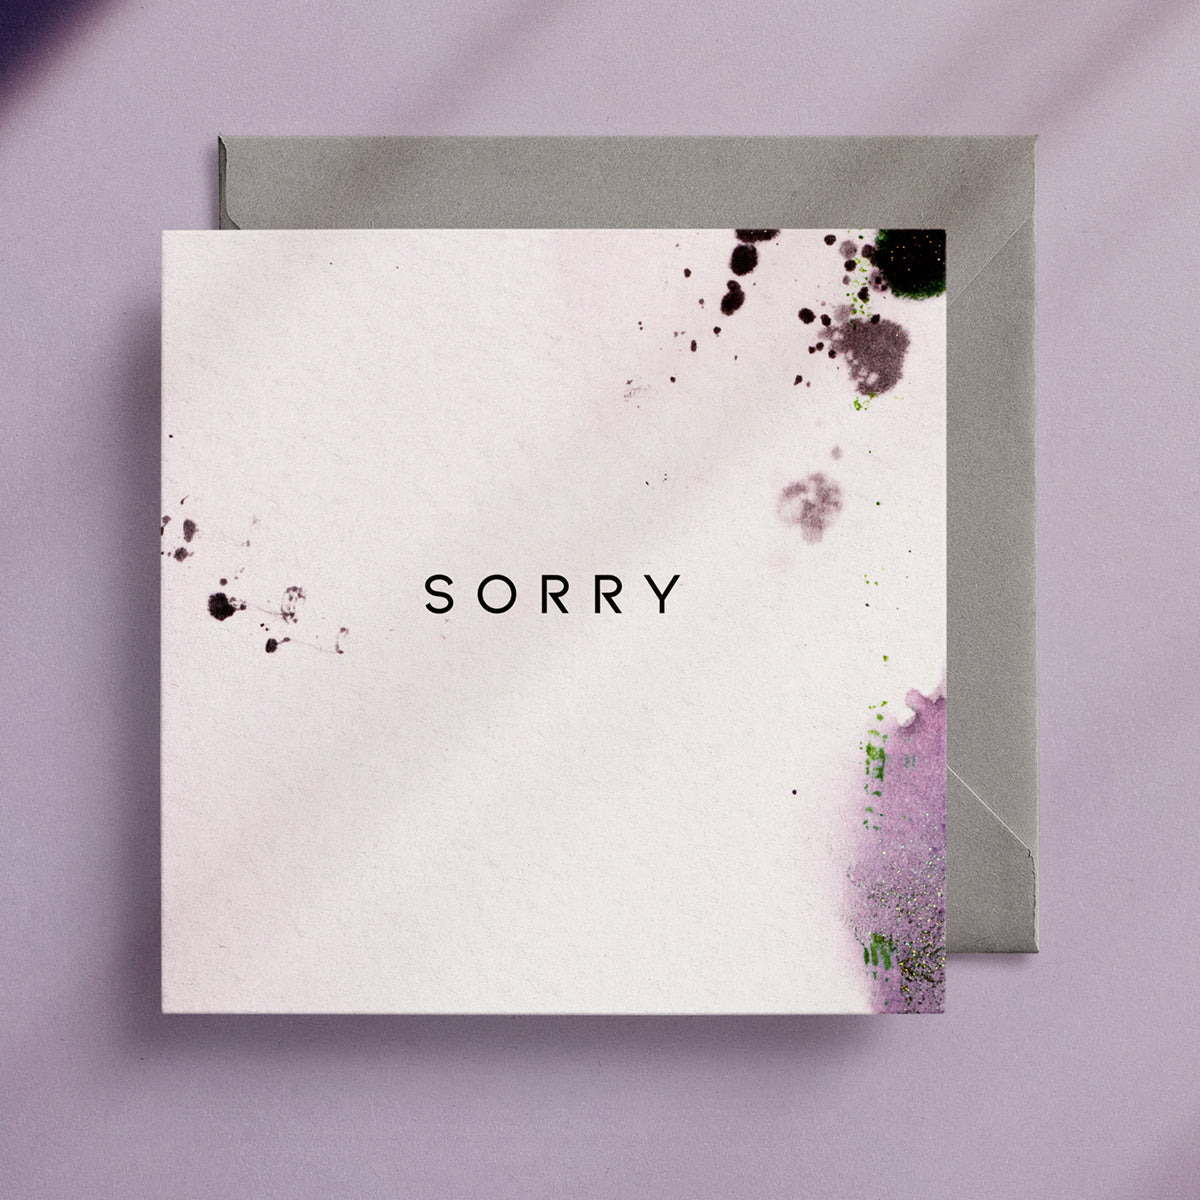 Sorry - ABSTRACT Greeting Card